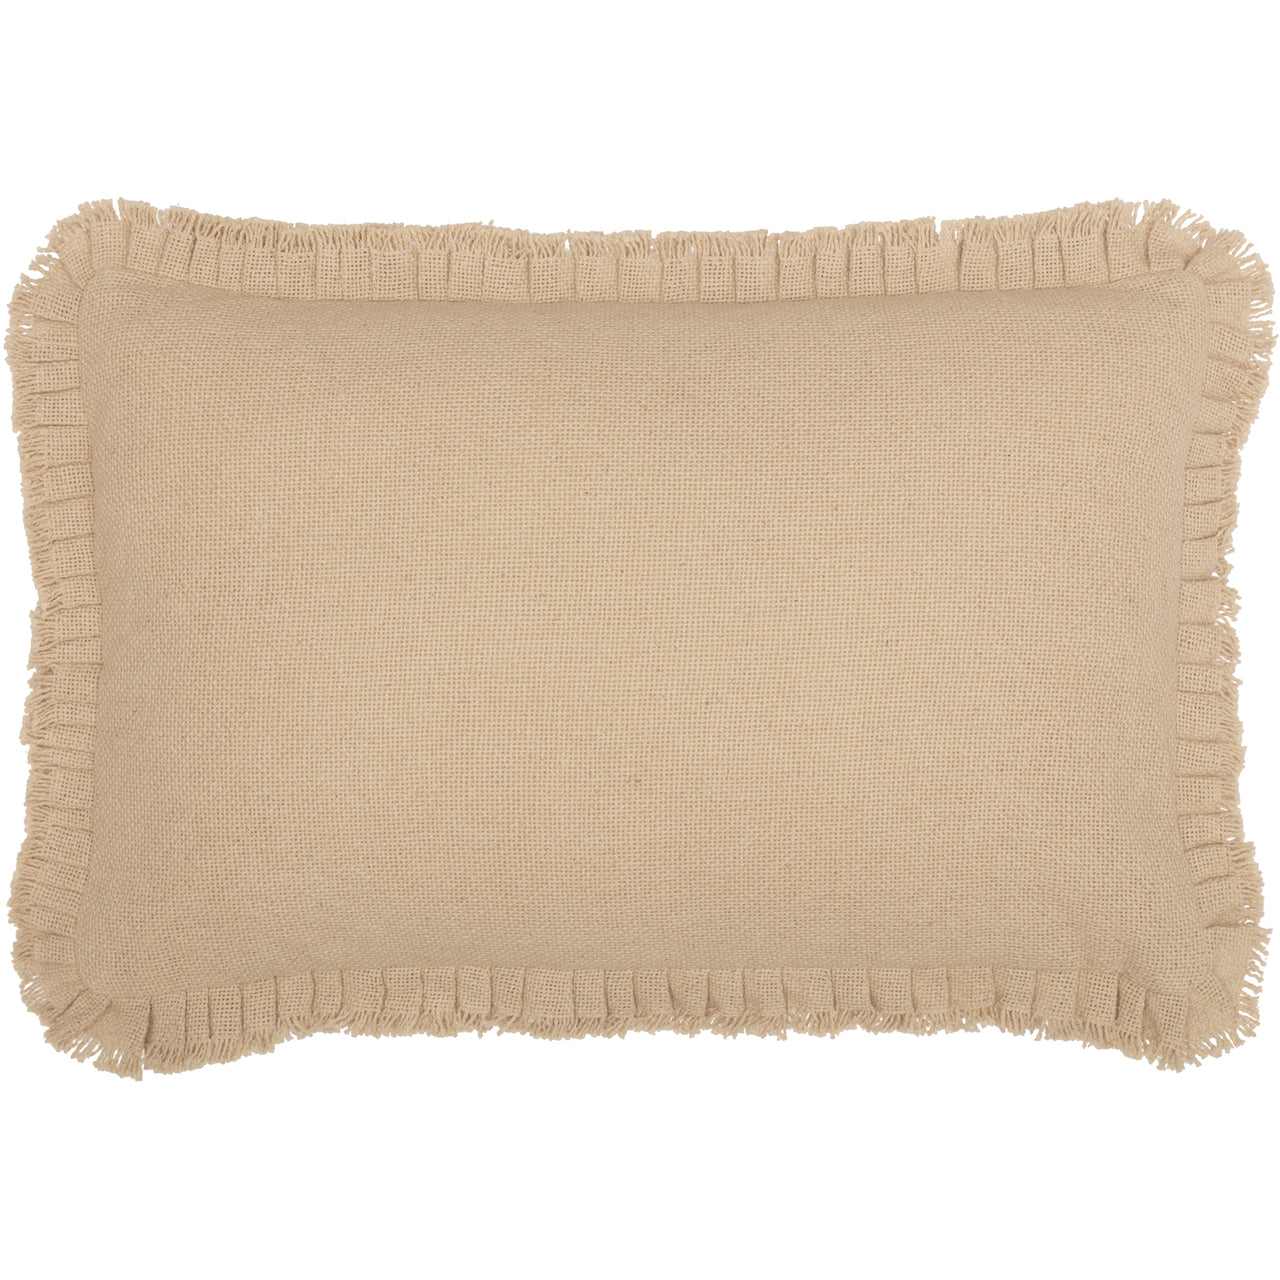 Burlap Vintage Pillow w/ Fringed Ruffle 14x22 VHC Brands